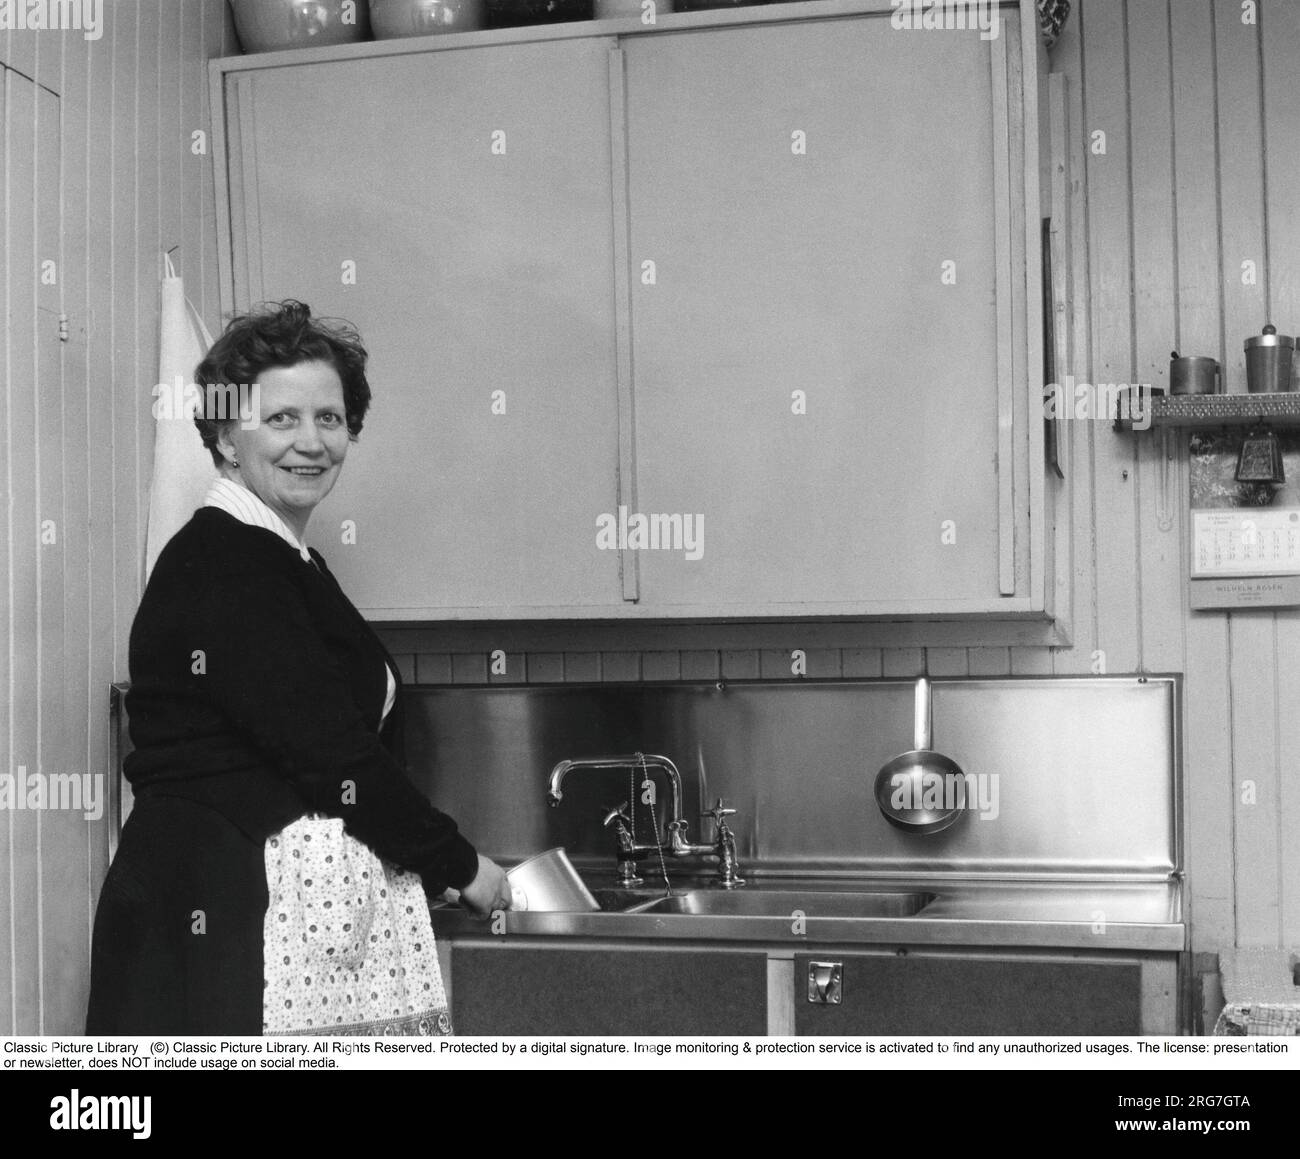 In the kitchen 1960s. Interior of a kitchen and a women cleaning a saucepan in the kitchen-sink. Sweden 1960. Stock Photo